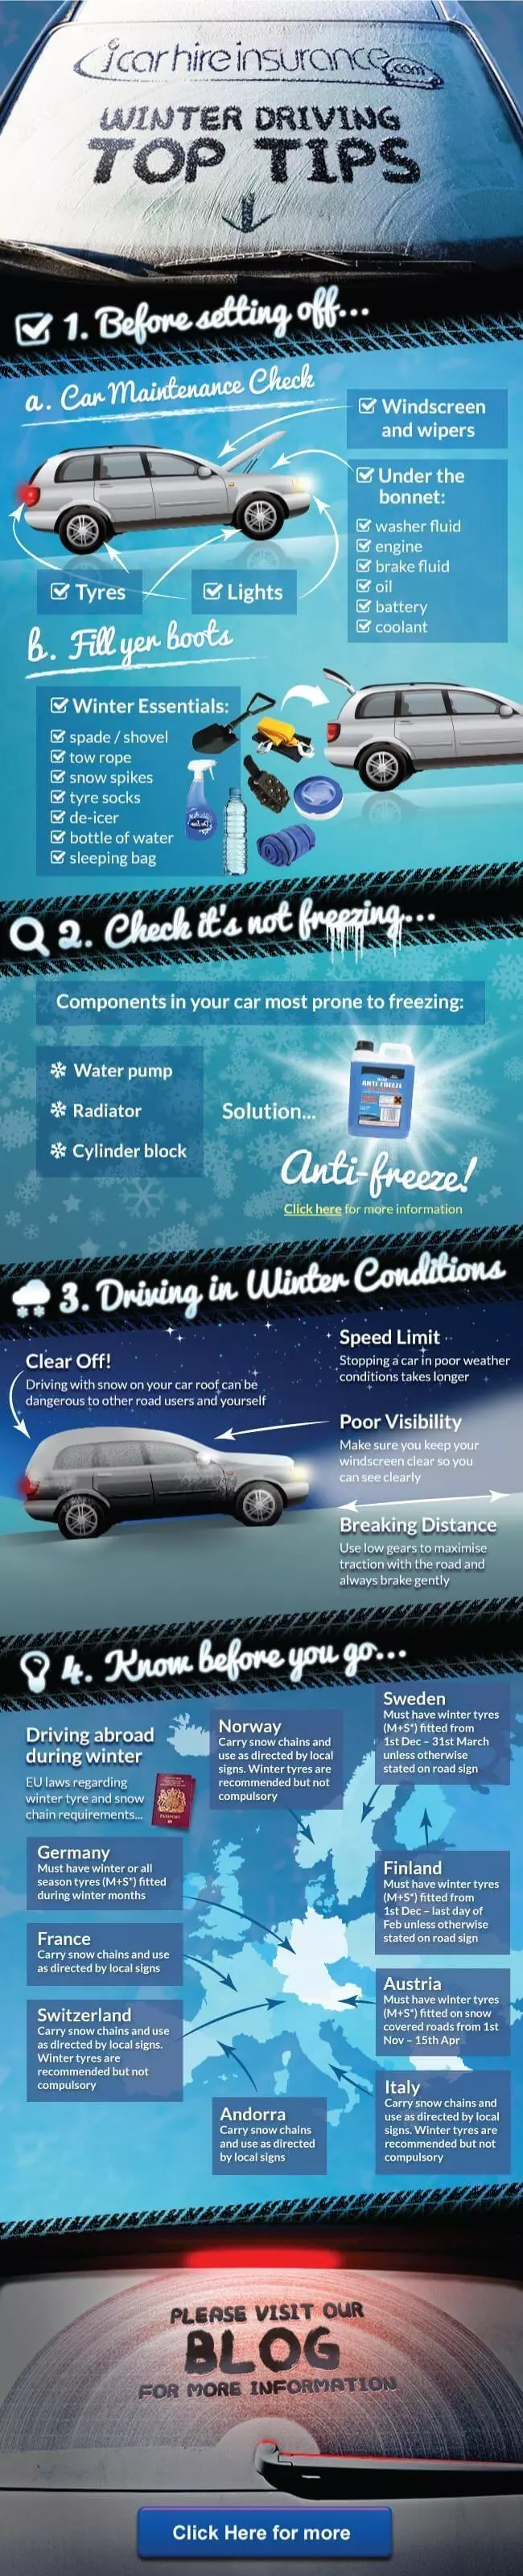 Winter Driving Top Tips